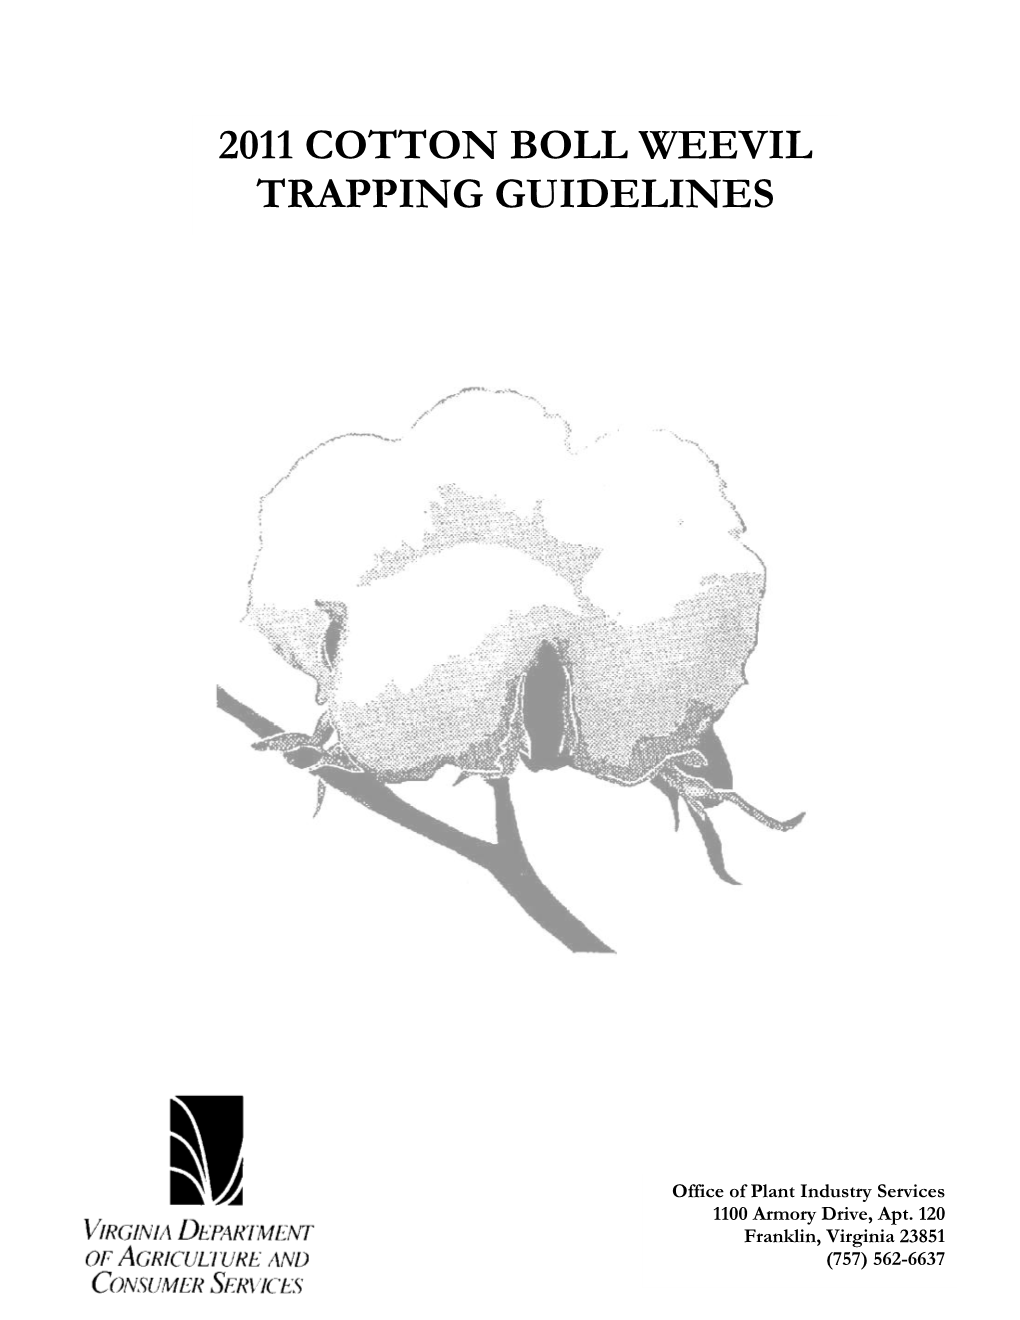 2011 Cotton Boll Weevil Trapping Guidelines